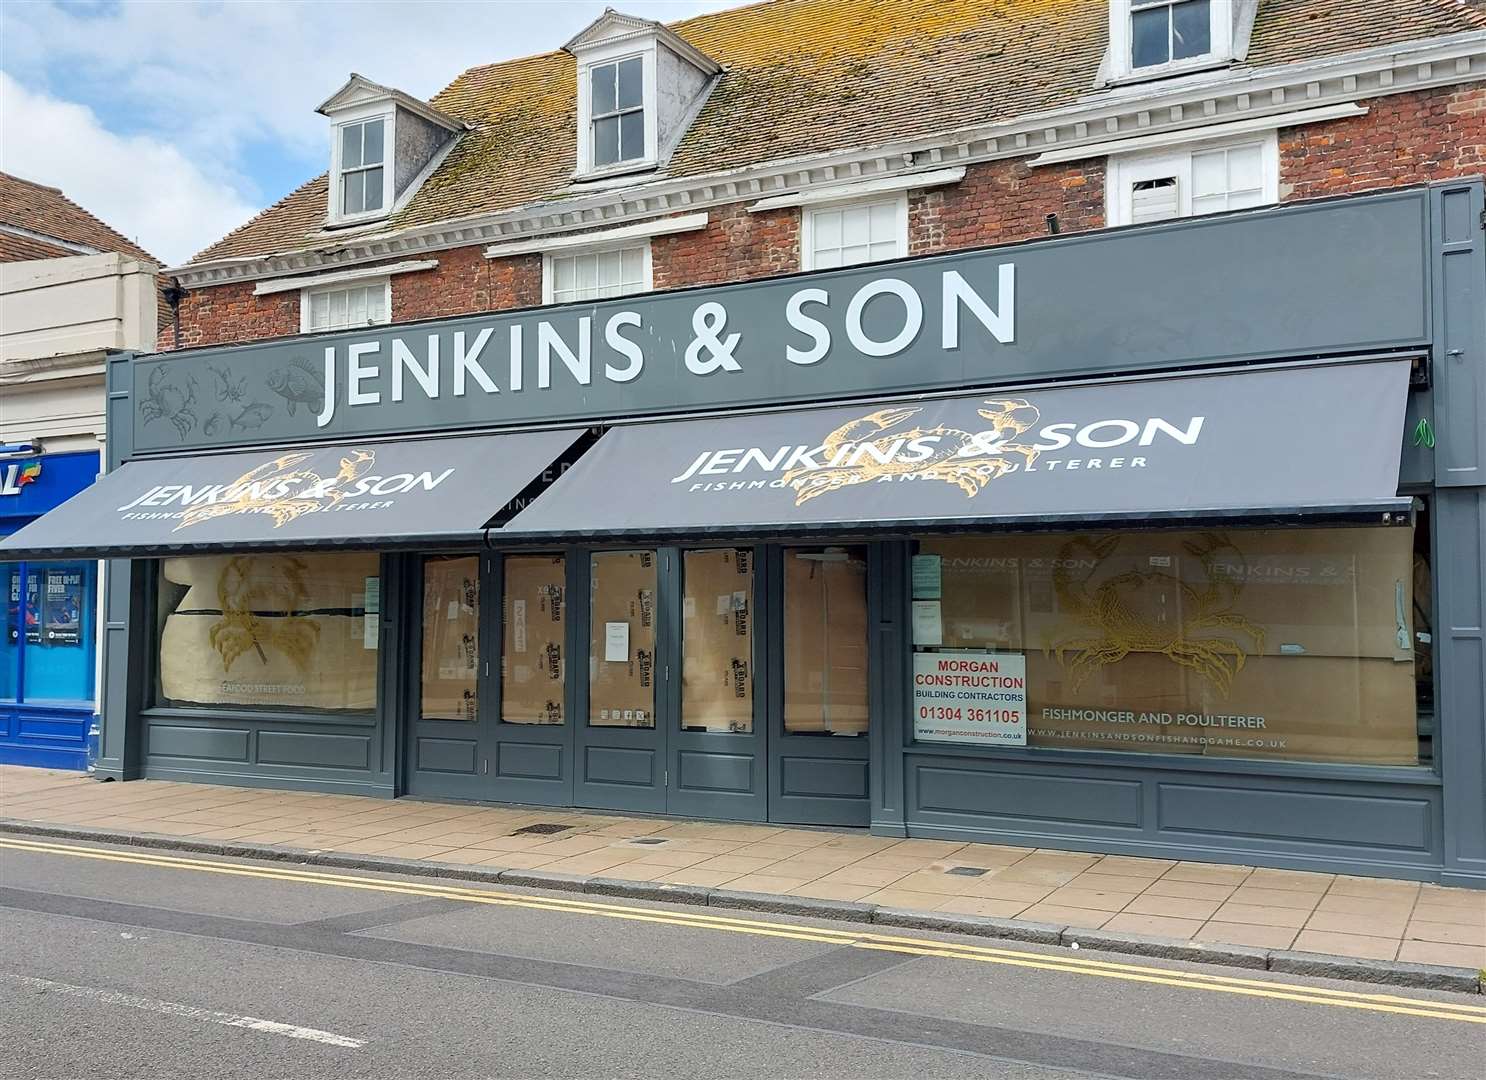 Jenkins and Son Fishmonger in Deal is quadrupling in size by moving into the former JC Rooks unit in the high street